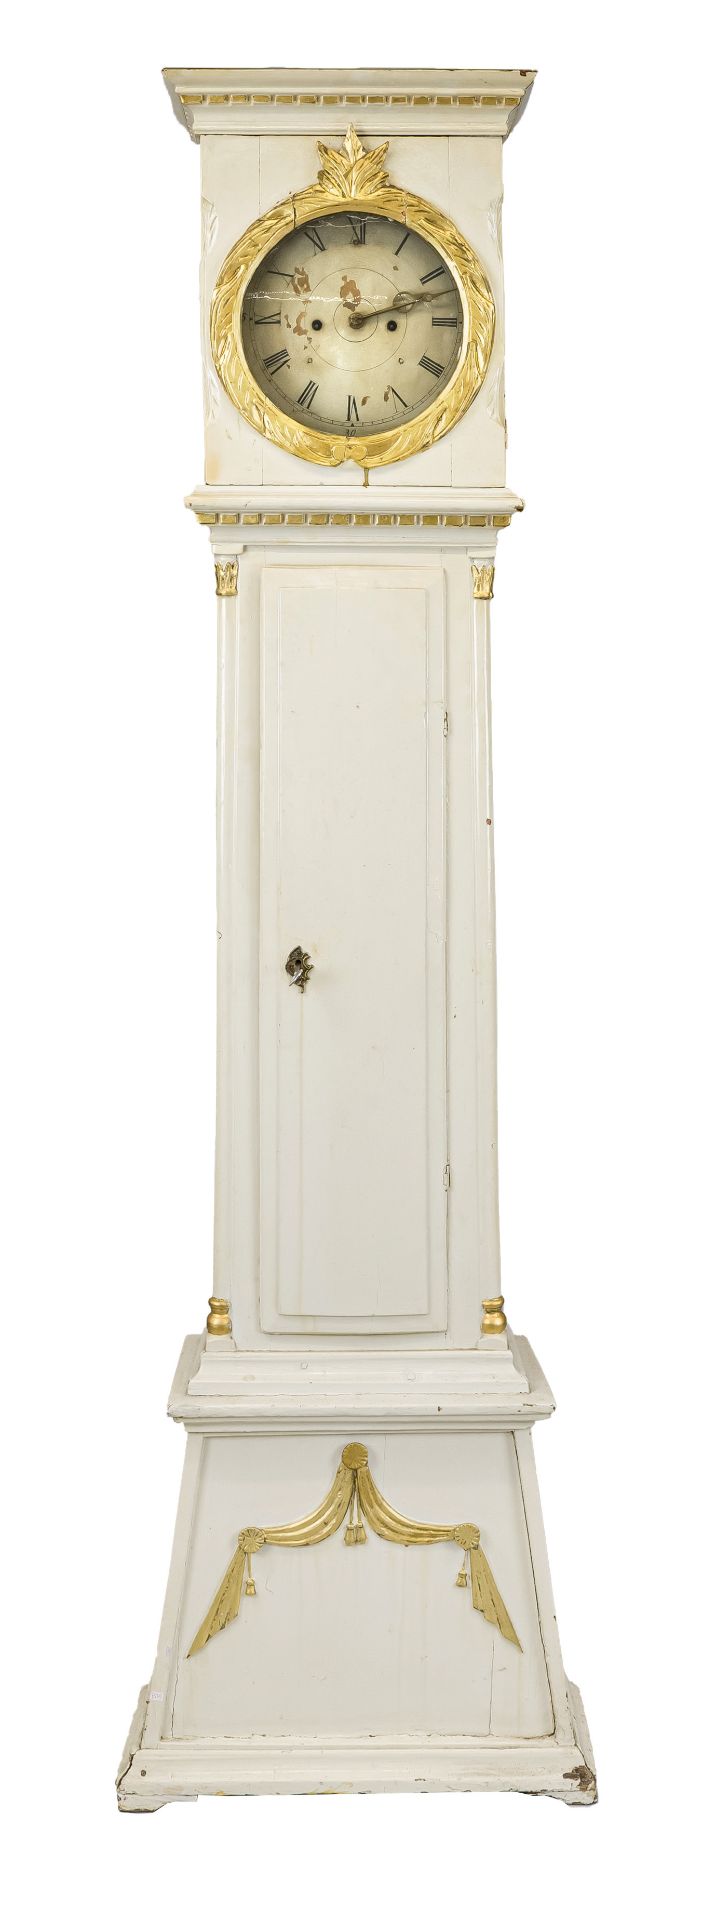 Swedish grandfather clock, Gustavian, early 19th century, white lacquered, set with gold, in the